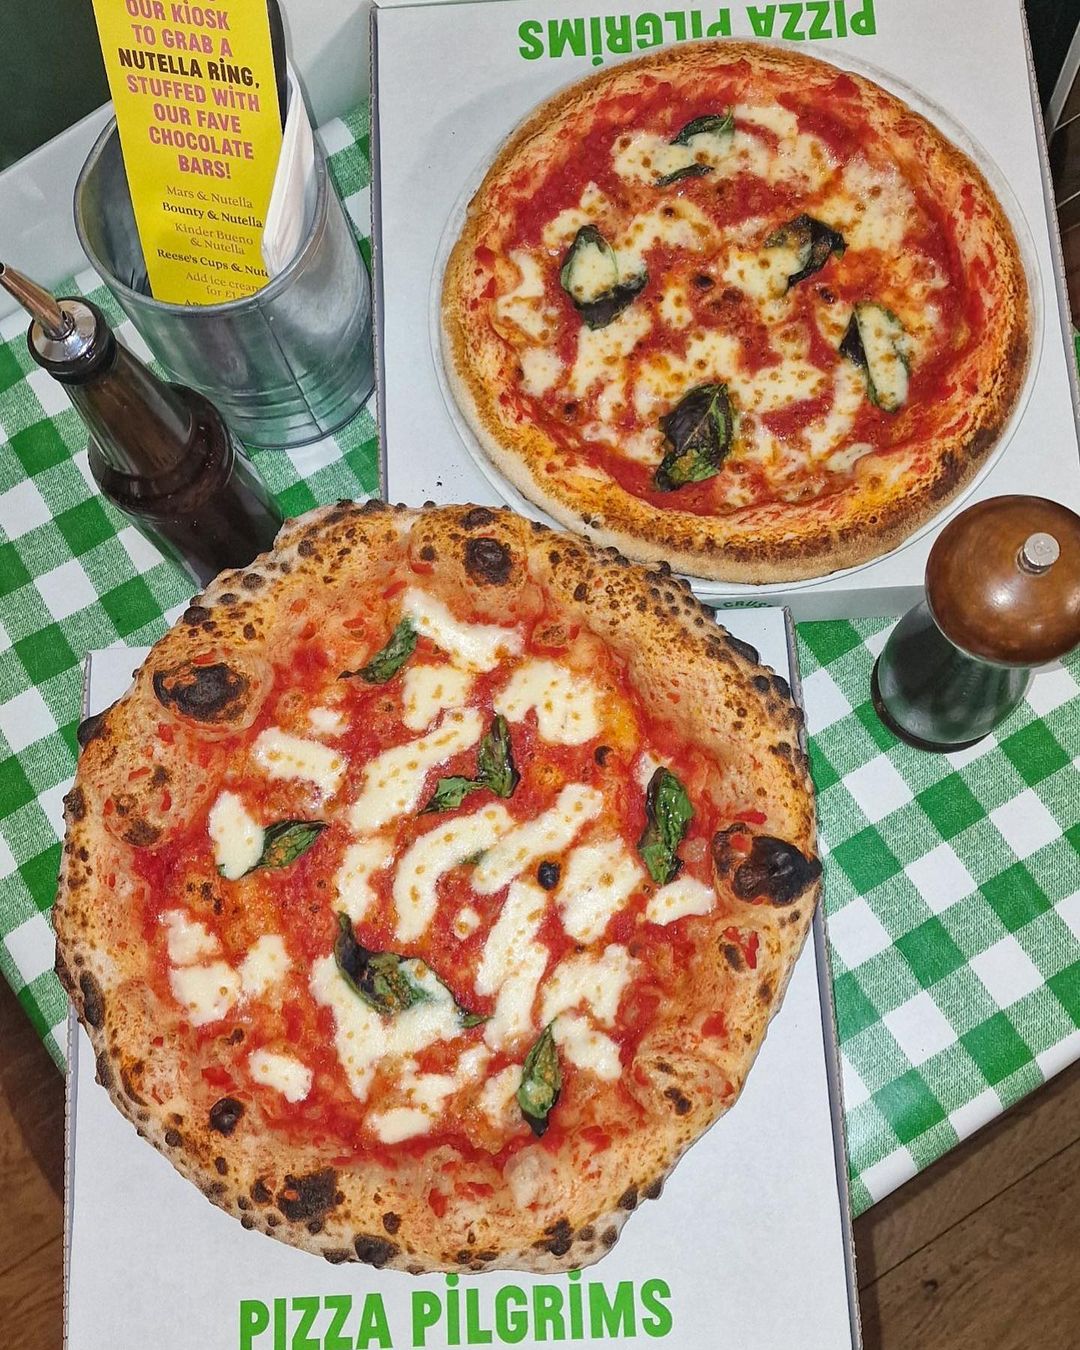 two margherita pizza, one normal base one gluten free on a green checkered table cloth.